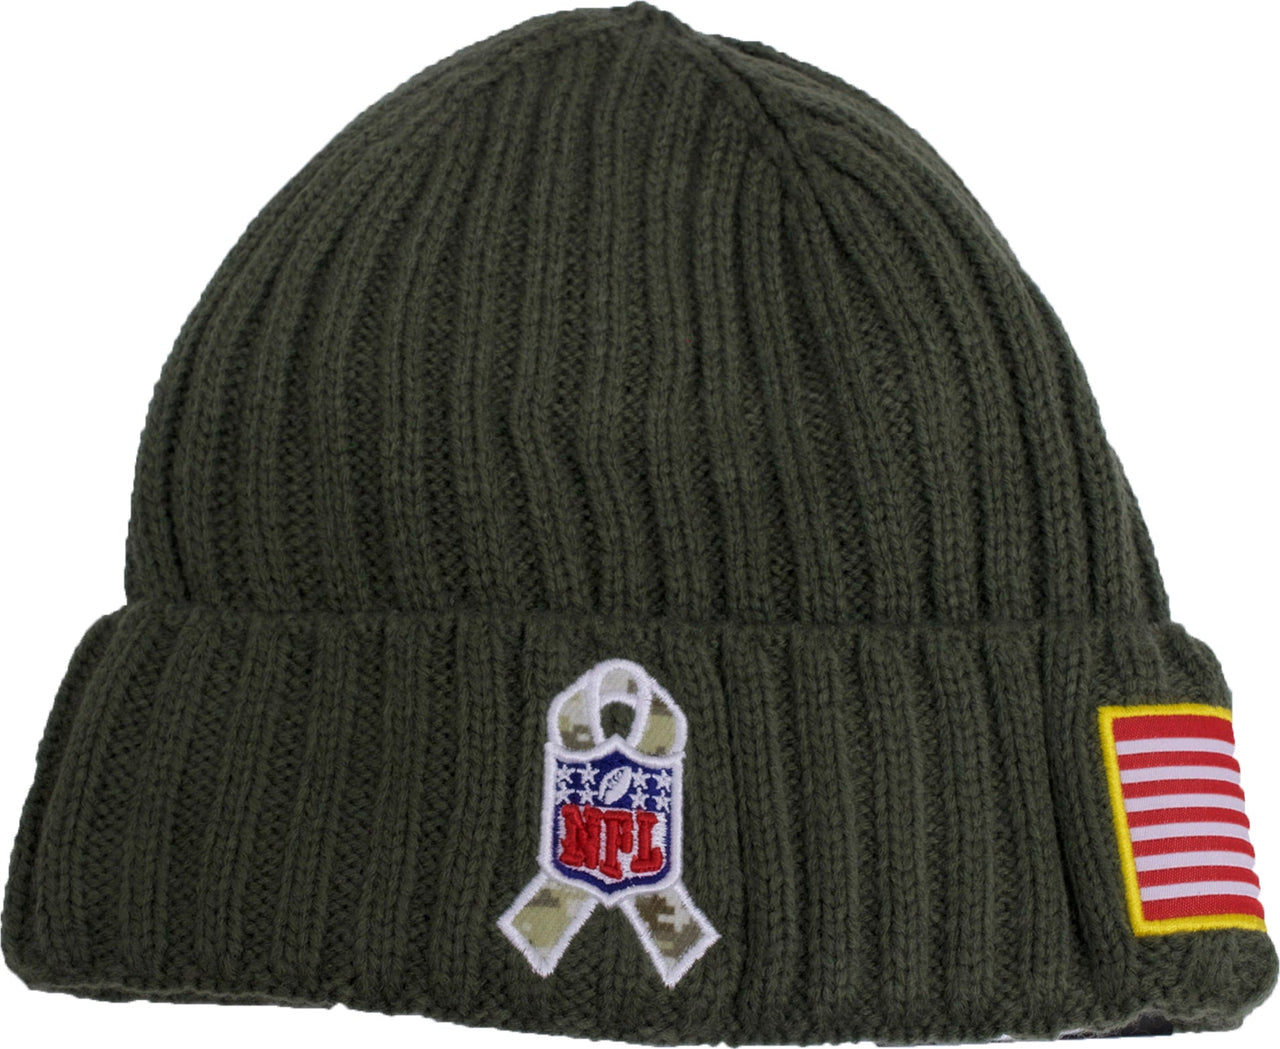 on the back of the new england patriots salute to service kids beanie is the nfl veterans ribbon